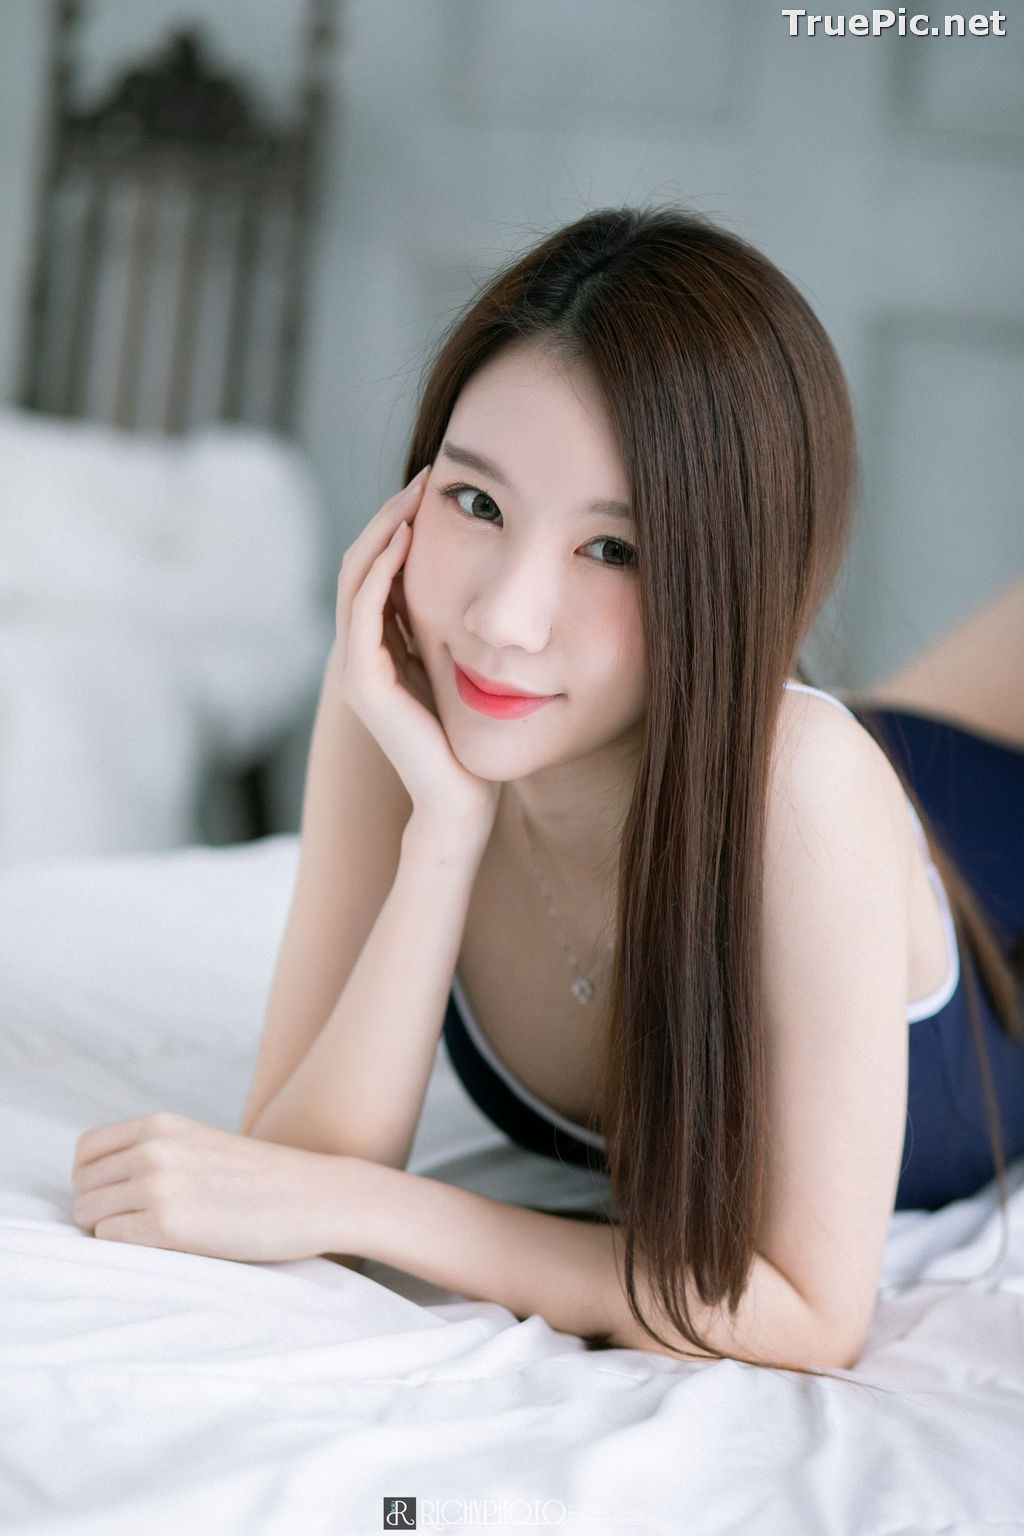 Image Thailand Model - Carolis Mok - Onepiece Swimsuit On The Bed - TruePic.net - Picture-31